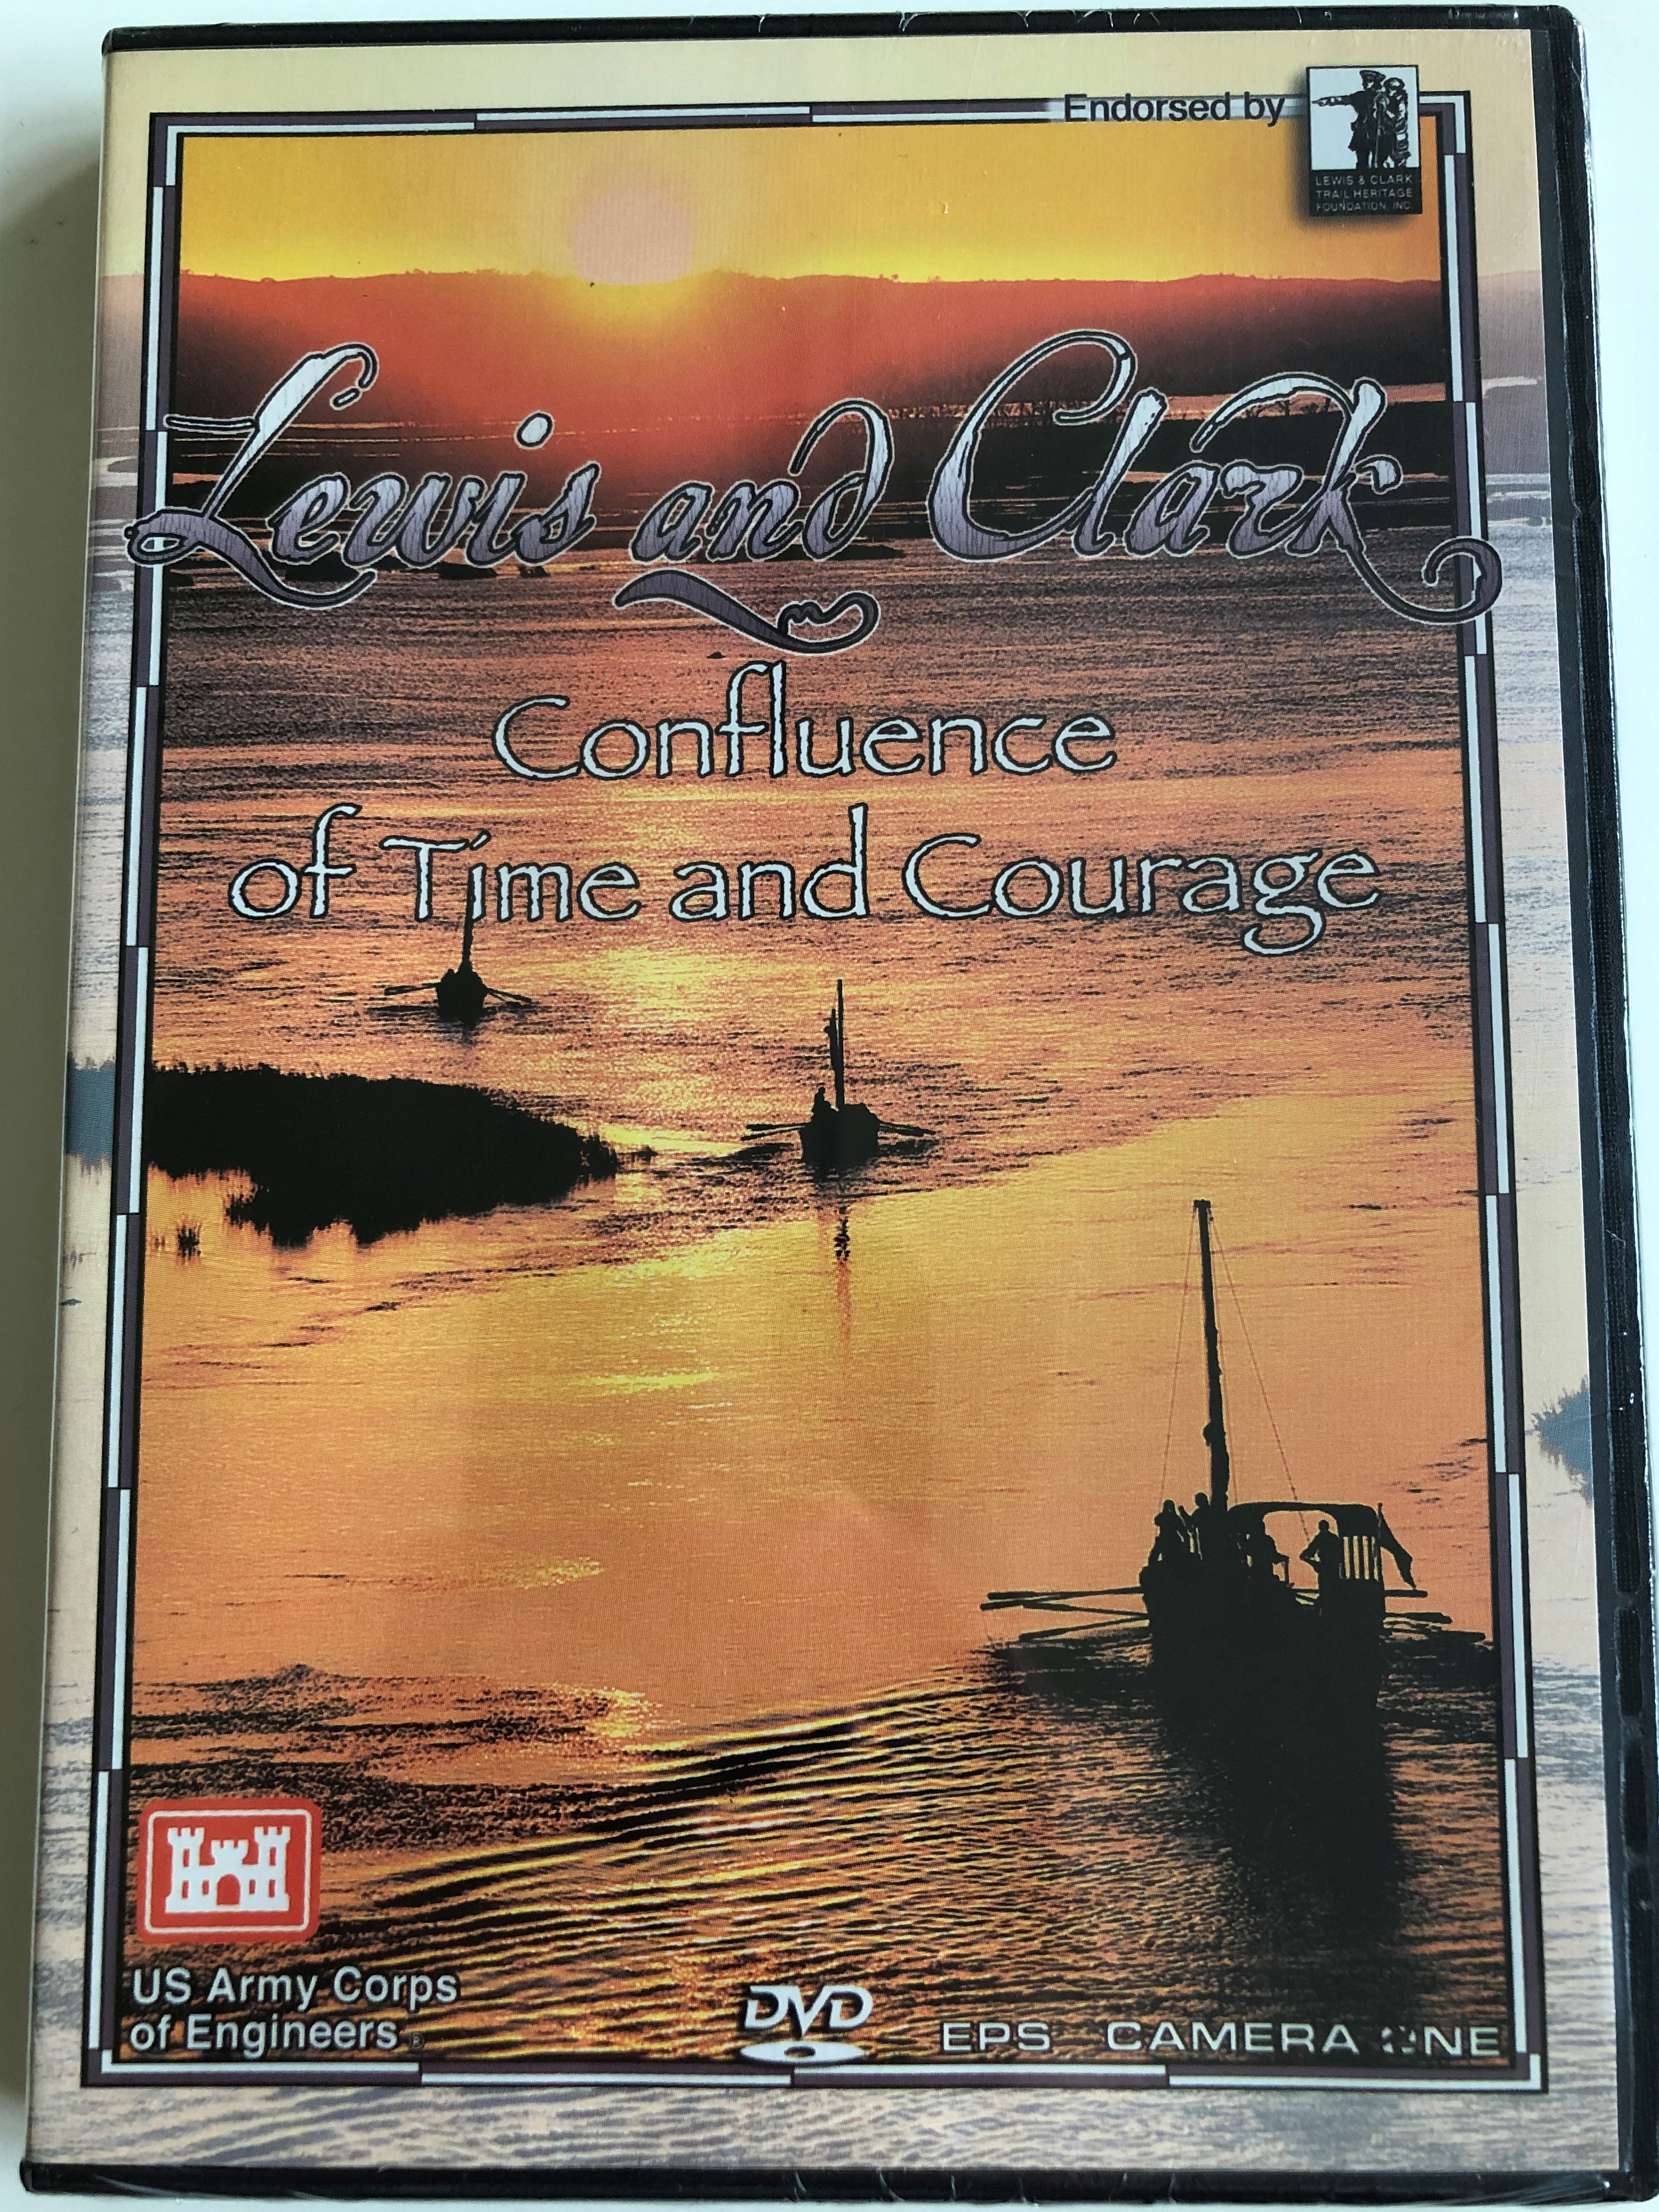 lewis-and-clark-confluence-of-time-and-courage-dvd-2004-directed-by-gray-warriner-the-official-lewis-and-clark-bicentennial-film-of-us-army-corps-of-engineers-npv-513-1-.jpg